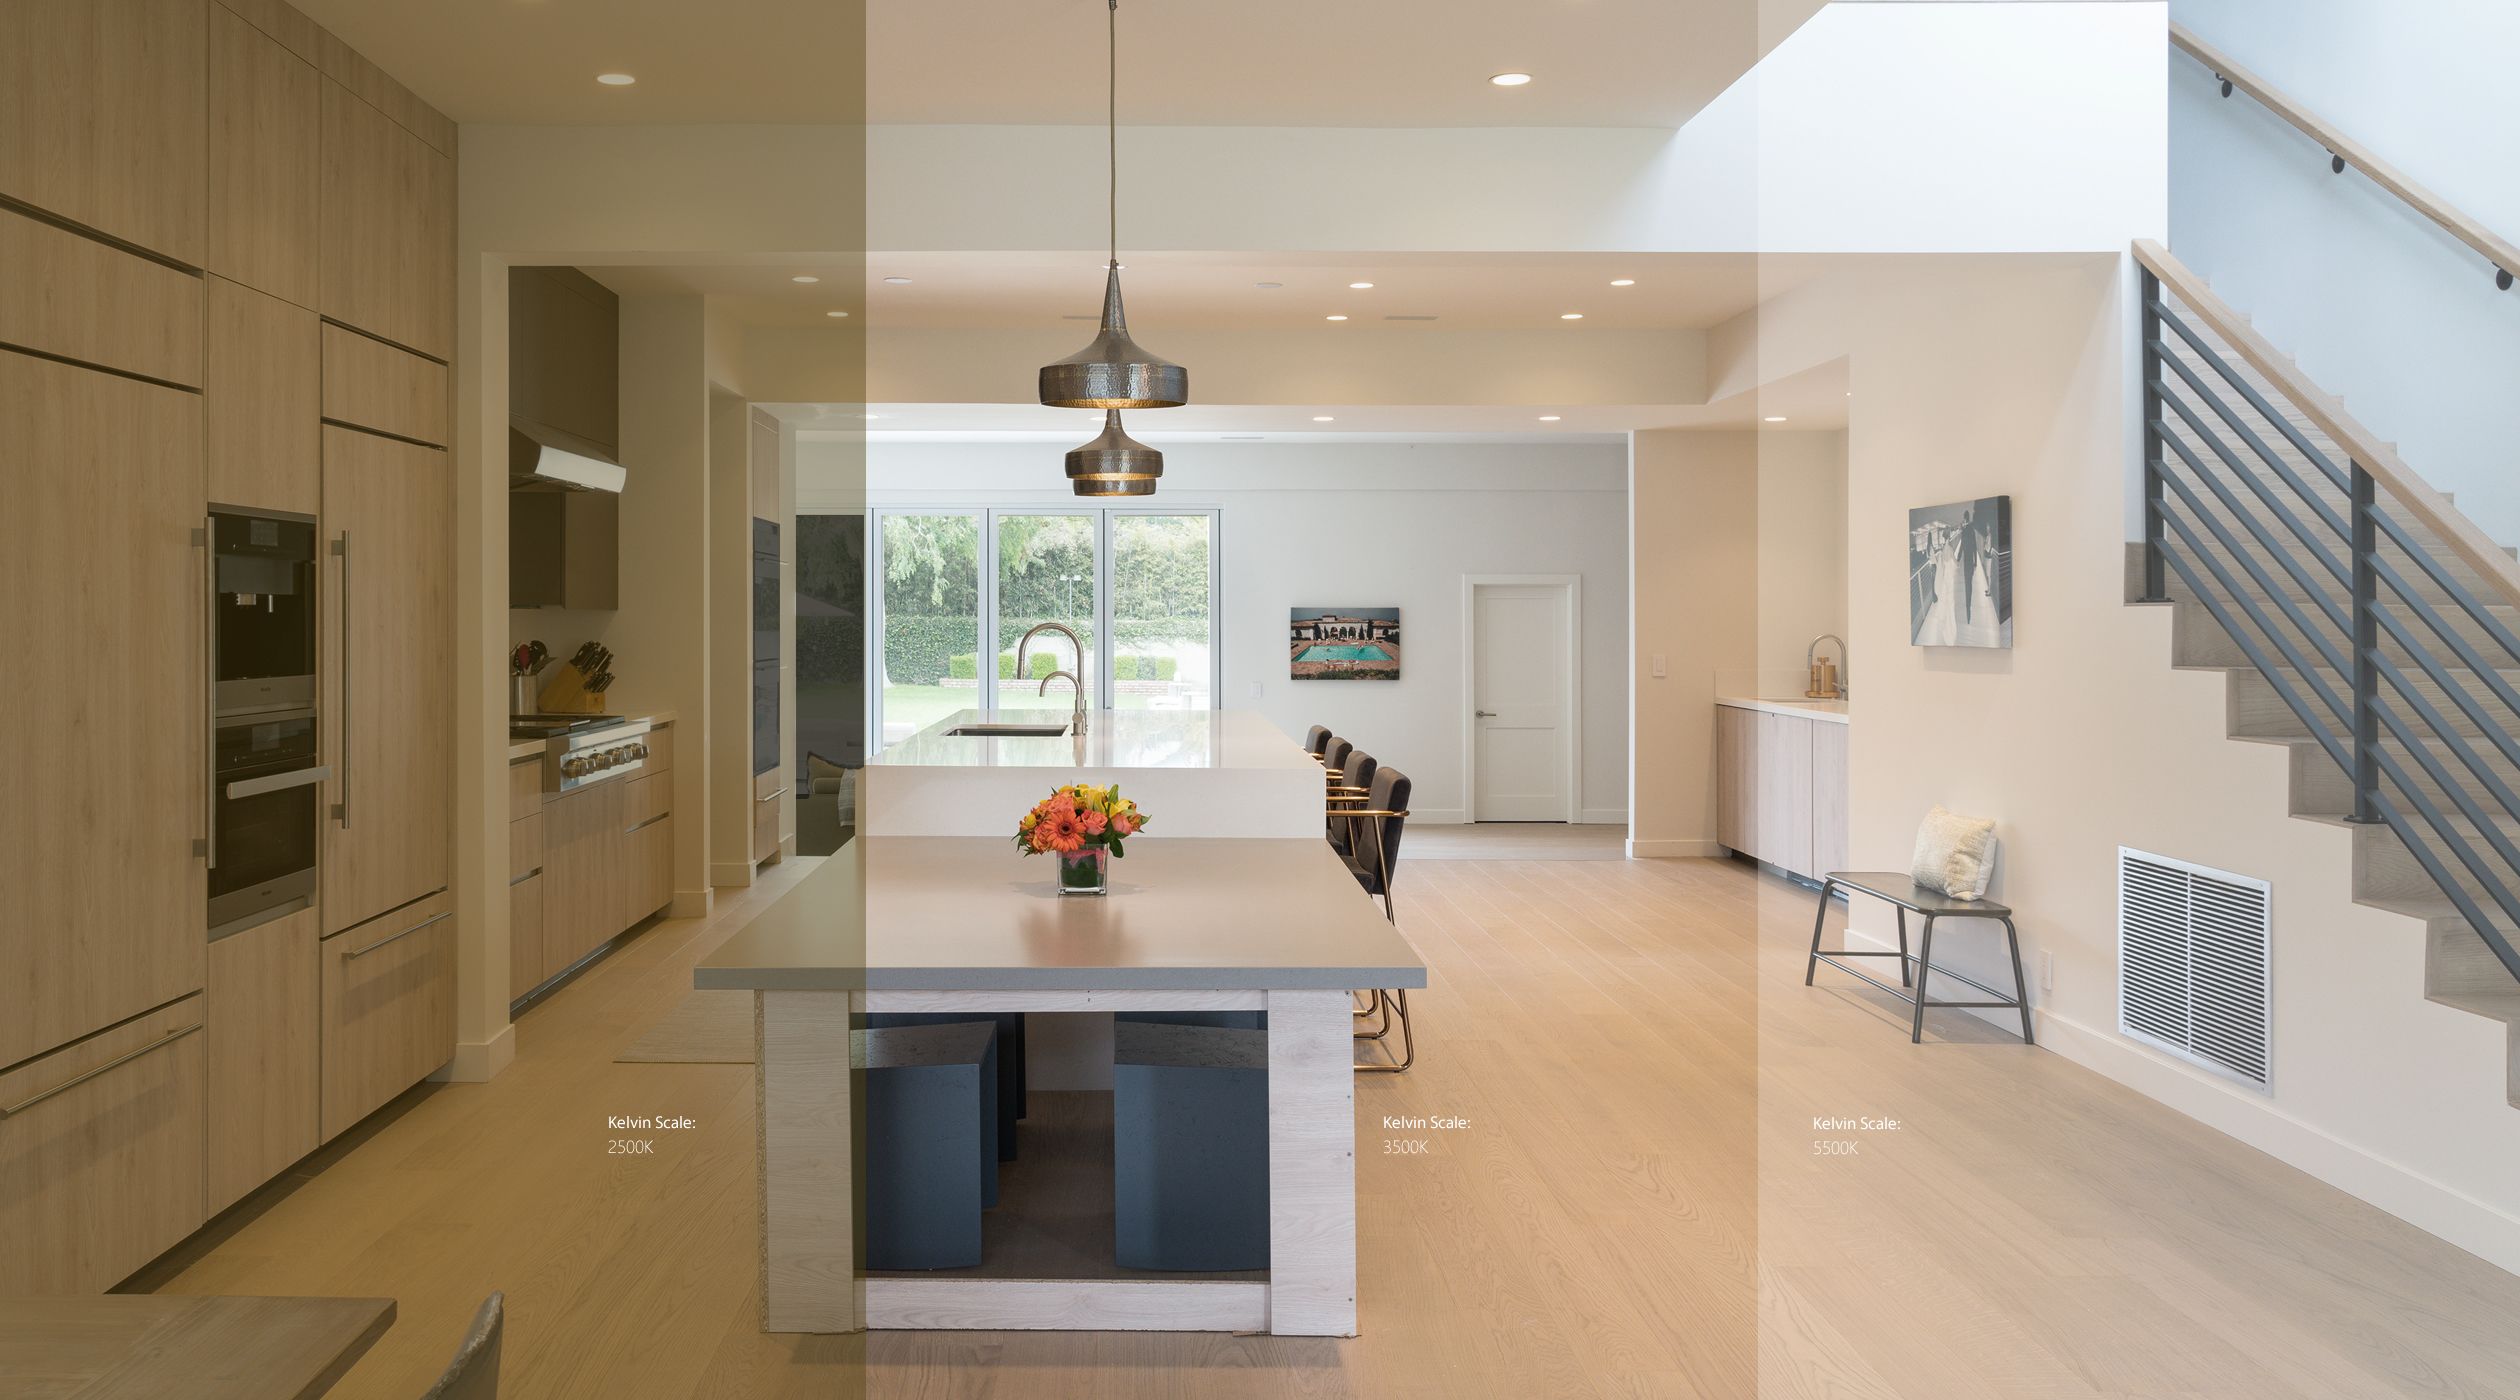 Ketra image of open concept kitchen